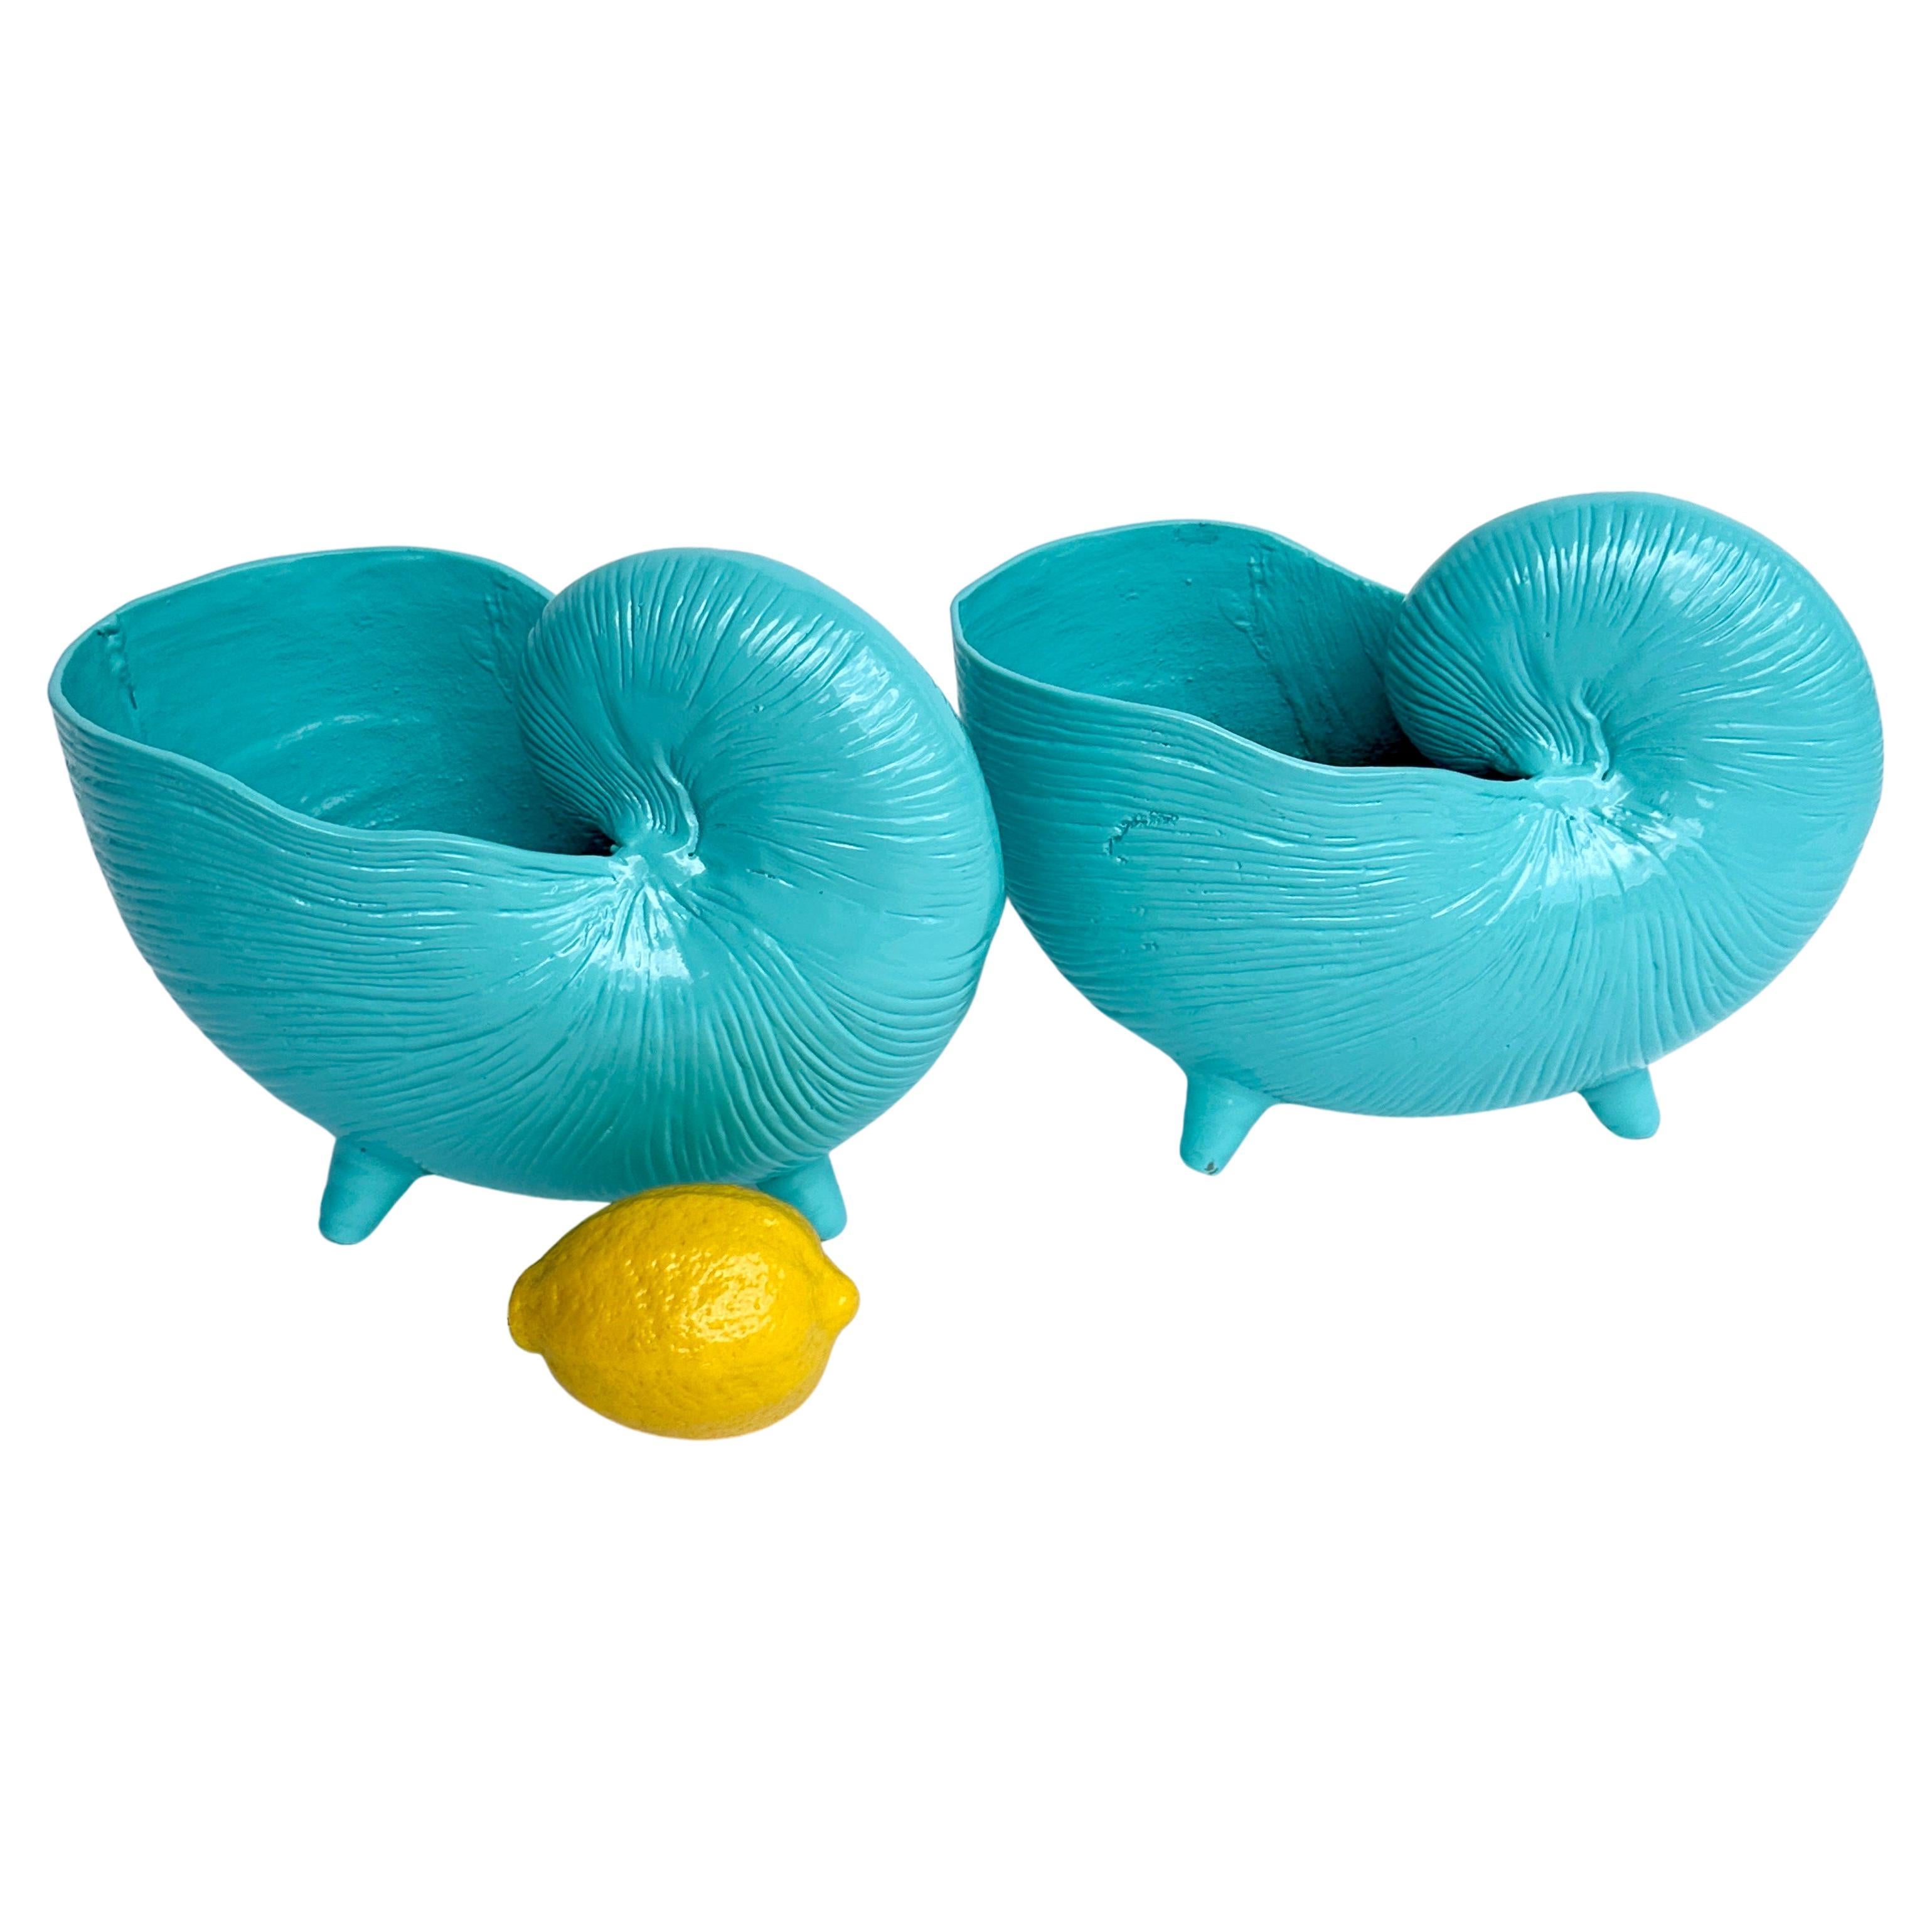 Solid Brass Seashell Nautilus Powder-Coated Blue Pair of Vintage Cachepots 
Stunning stand-alone pieces well suited as centerpieces on a table. The size of these also makes them functional to hold mail or as a catch all in any formal or informal